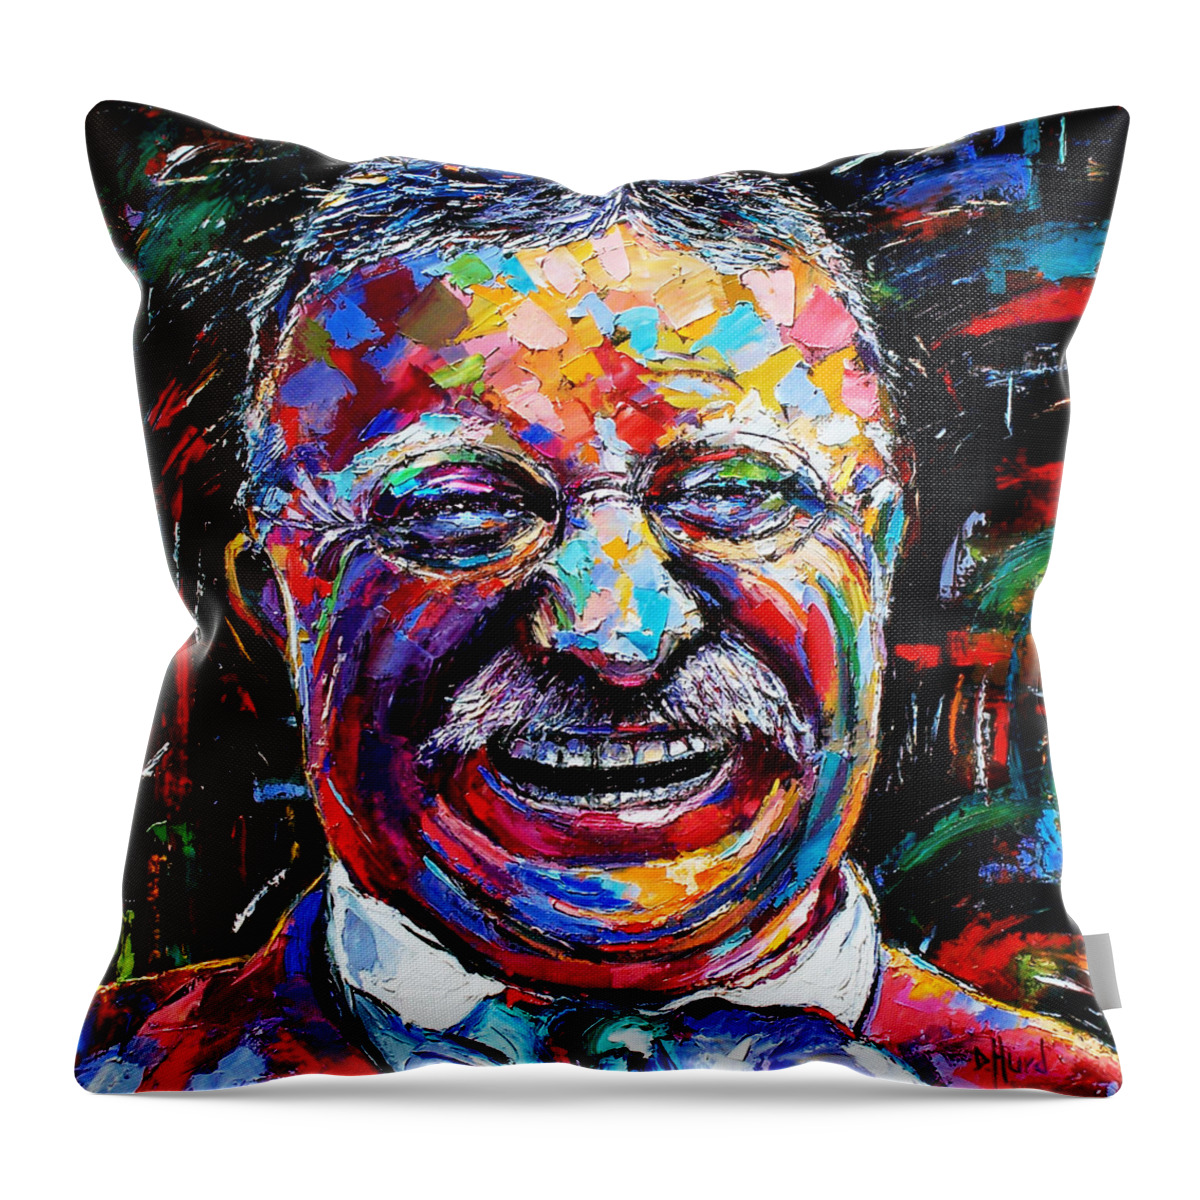 Teddy Roosevelt Throw Pillow featuring the painting Teddy Roosevelt by Debra Hurd